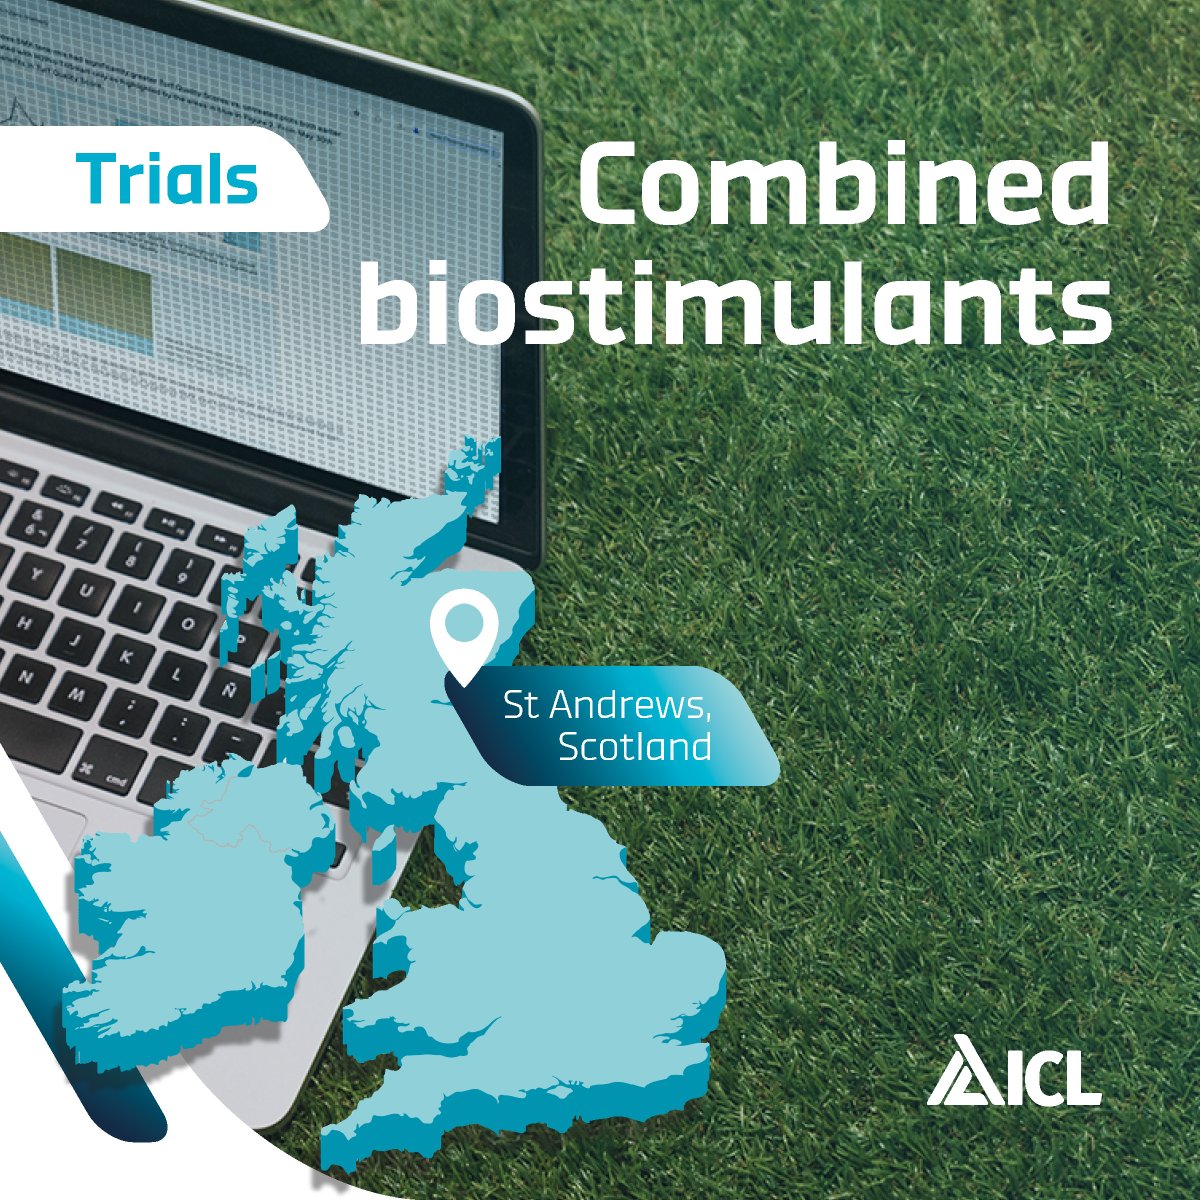 A recent trial we conducted shows that H2Pro TriSmart significantly improved volumetric moisture content and turf quality scores. When used in combination with Vitalnova SMX, it further enhanced turf quality throughout the season, while also boosting microbial biomass and…